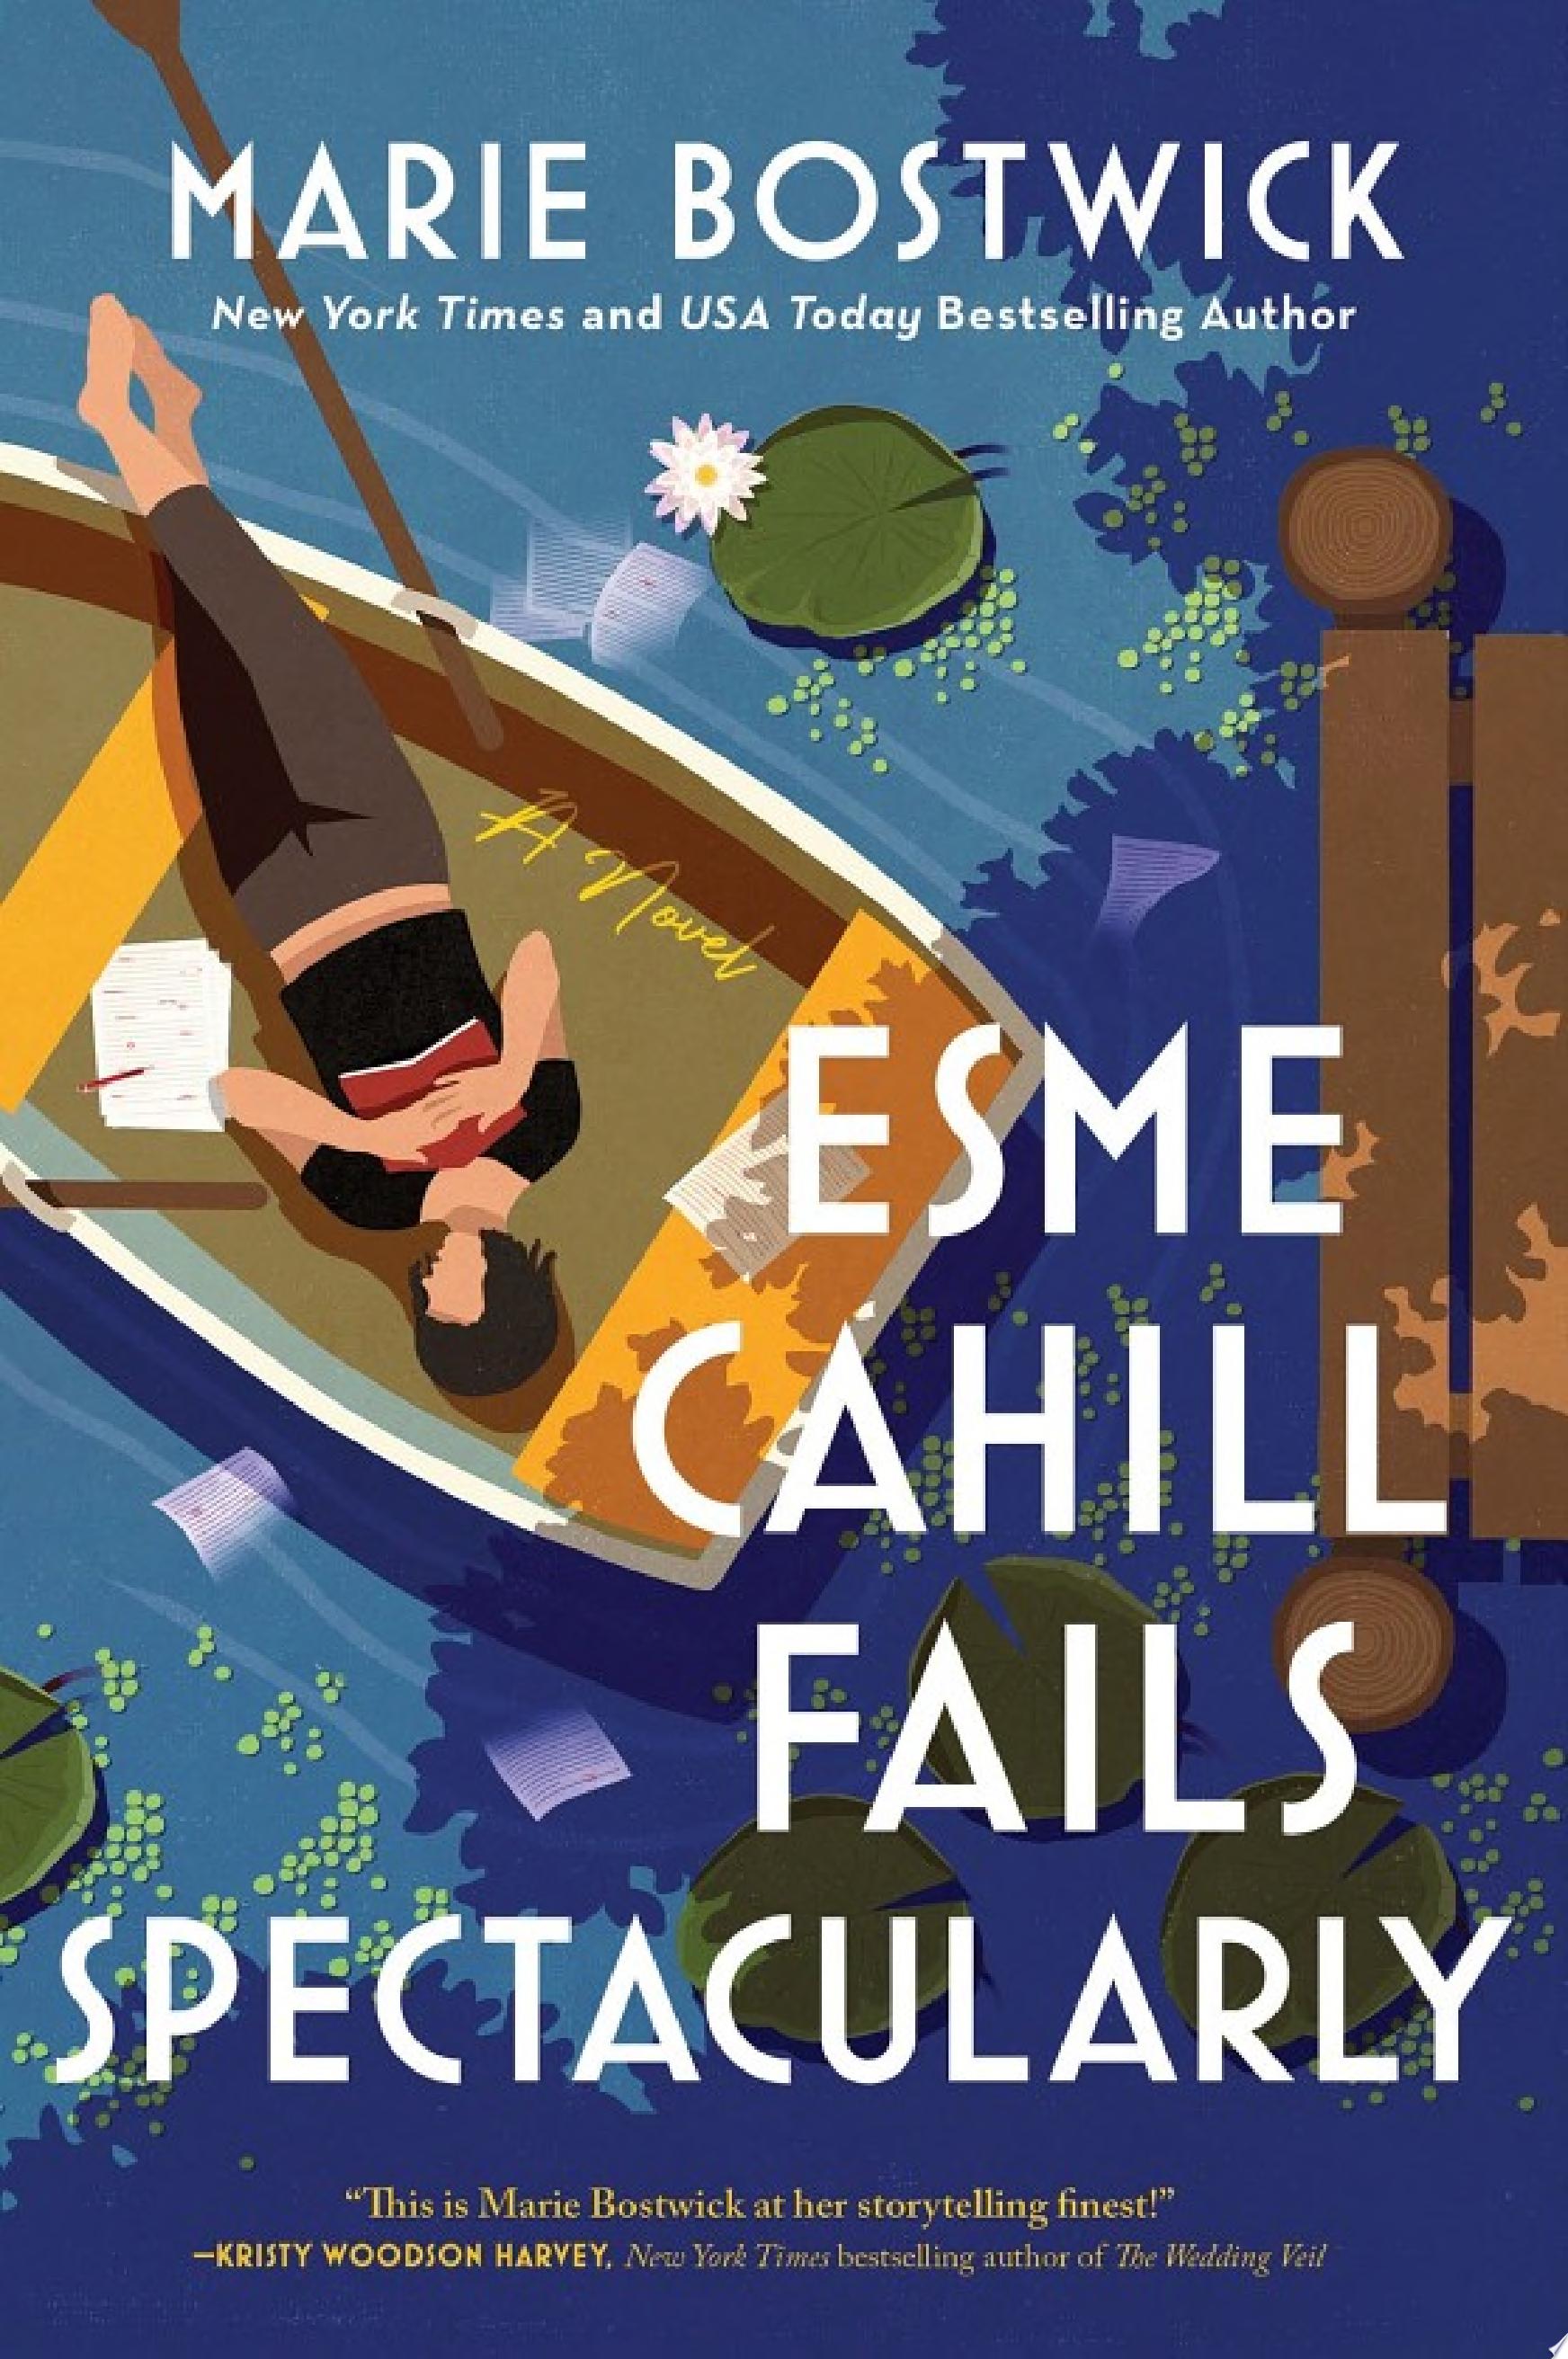 Image for "Esme Cahill Fails Spectacularly"